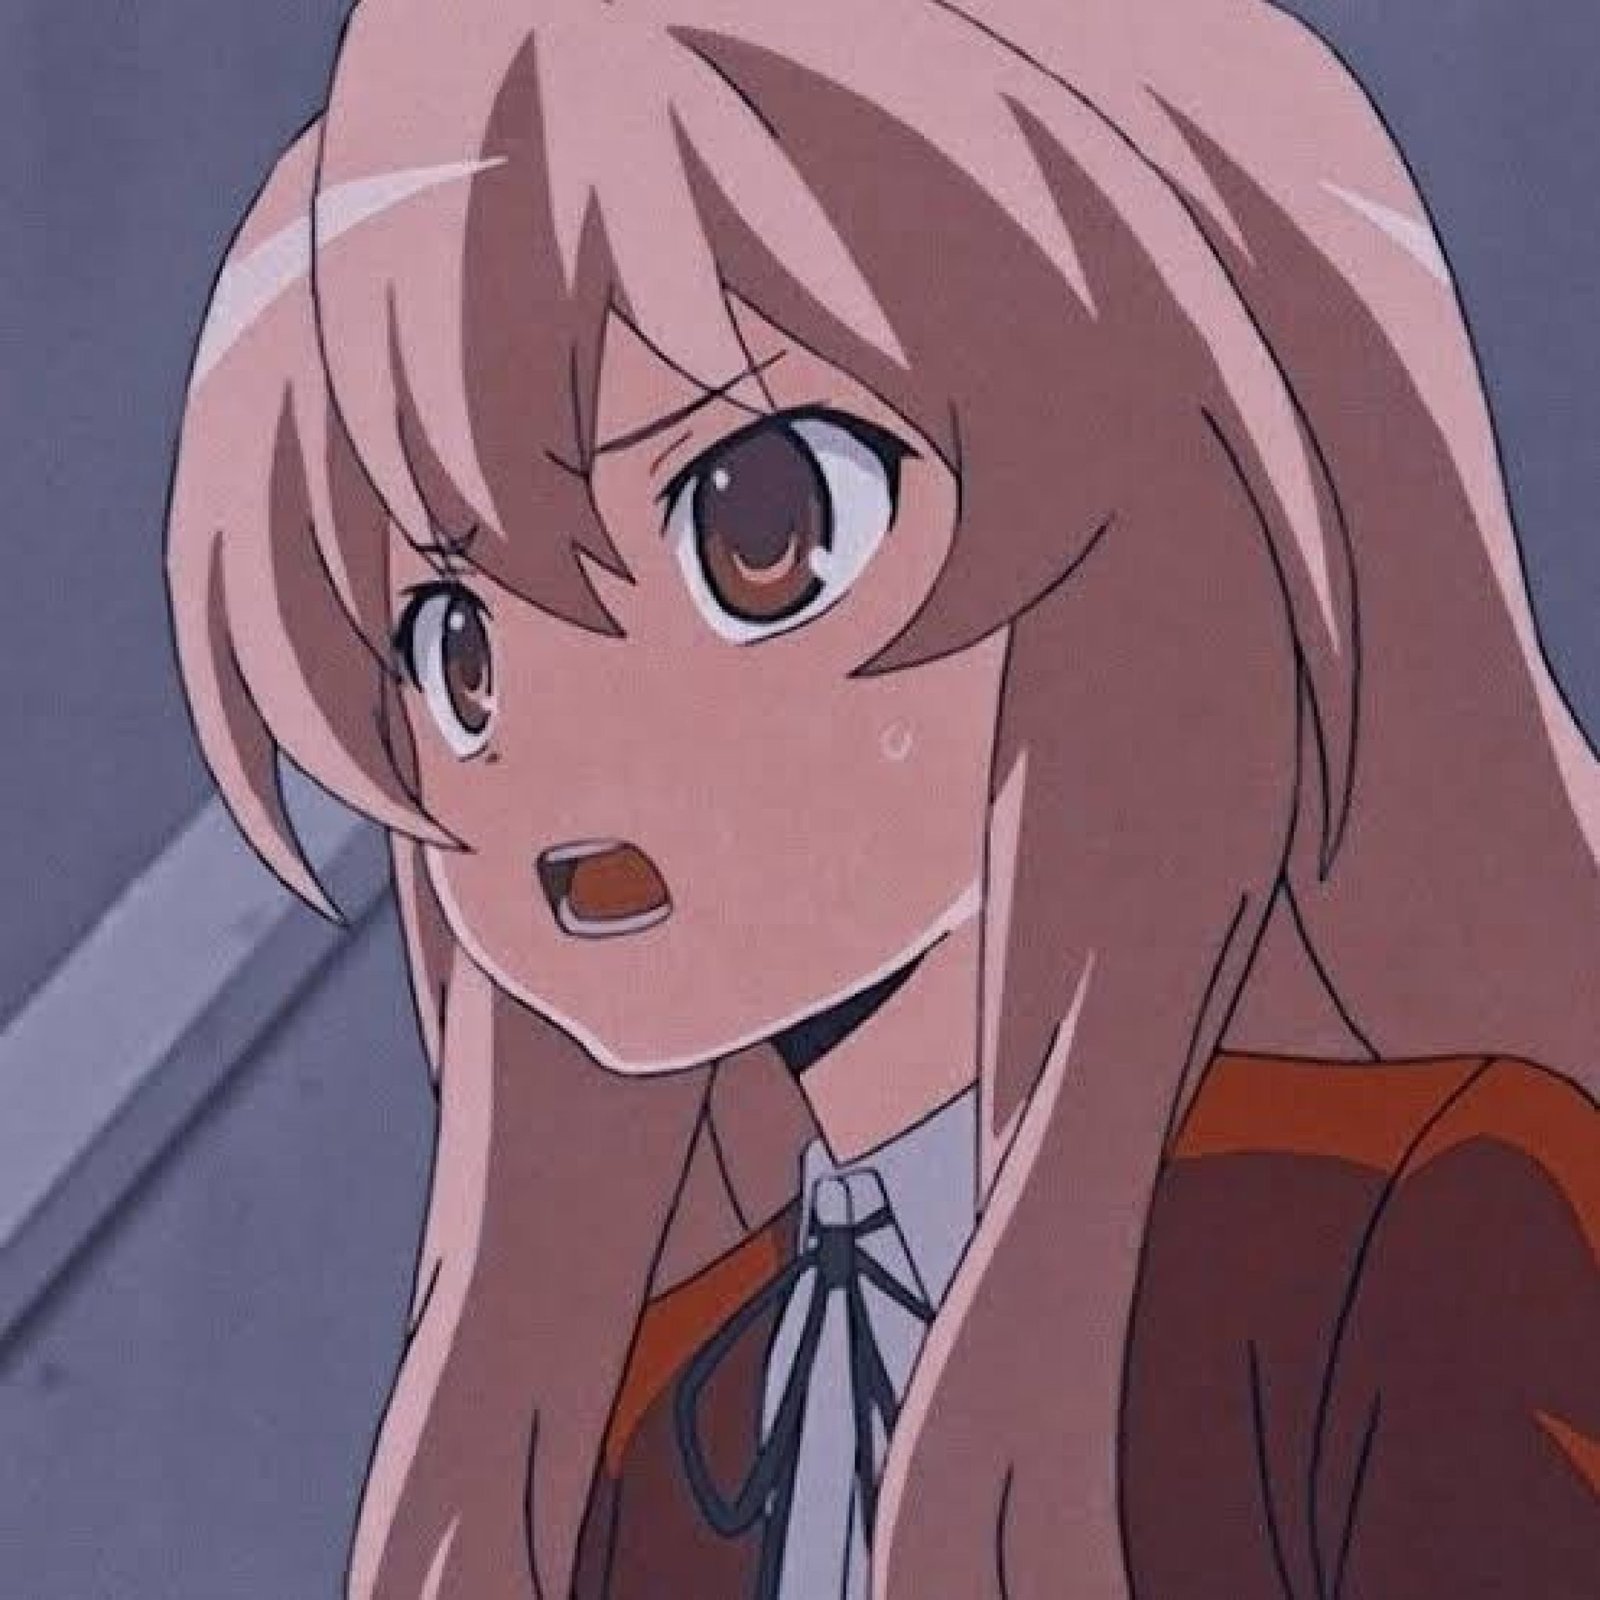 Top 10 famous quotes of Taiga from anime Toradora - Anime Rankers